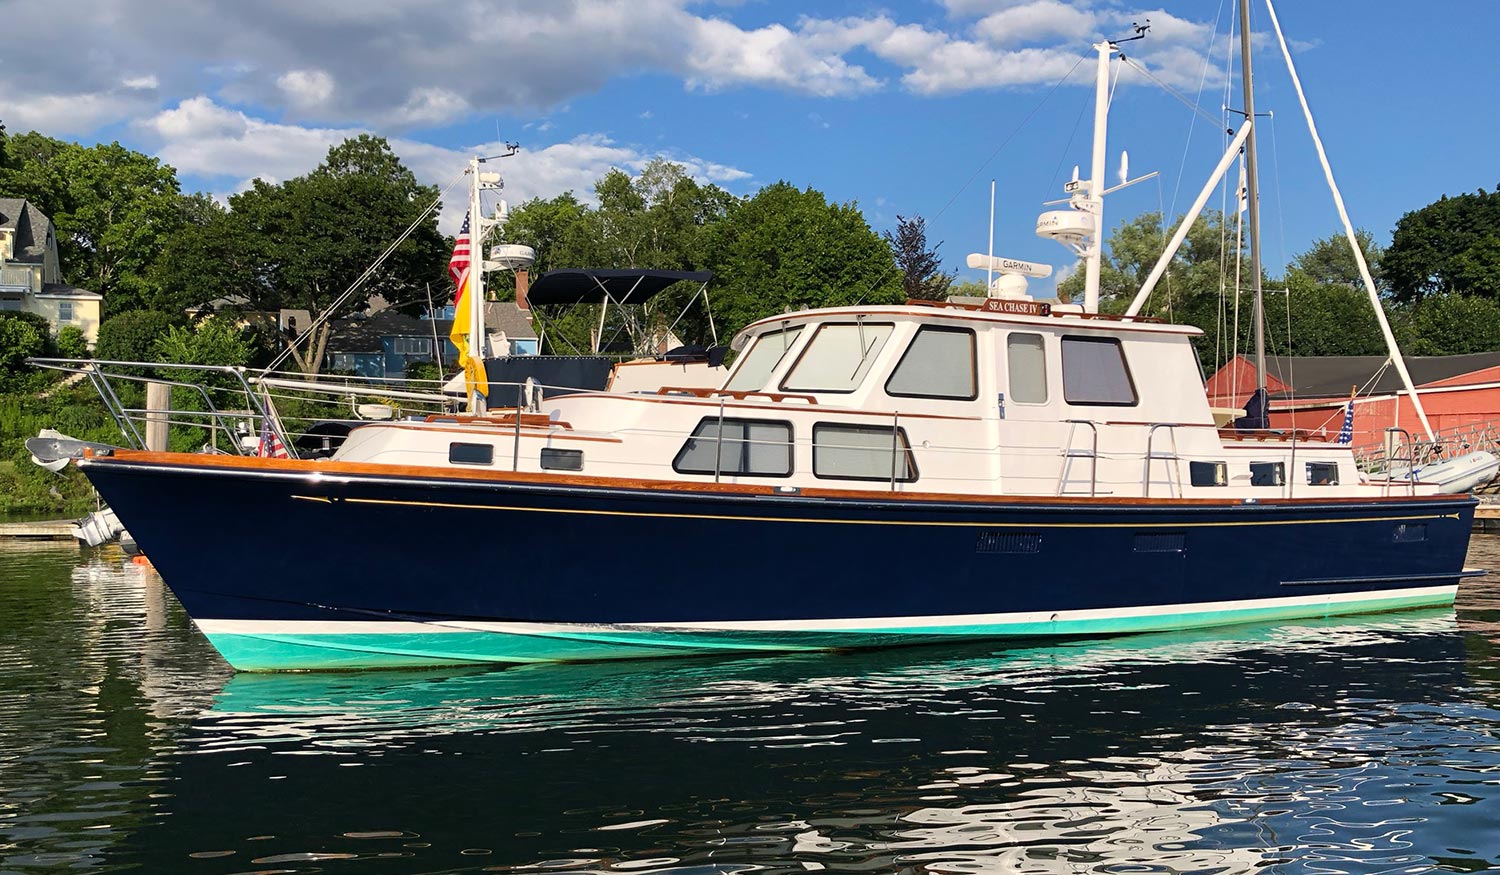 Sea Chase IV has a new lease on life after a refit at Lyman-Morse.